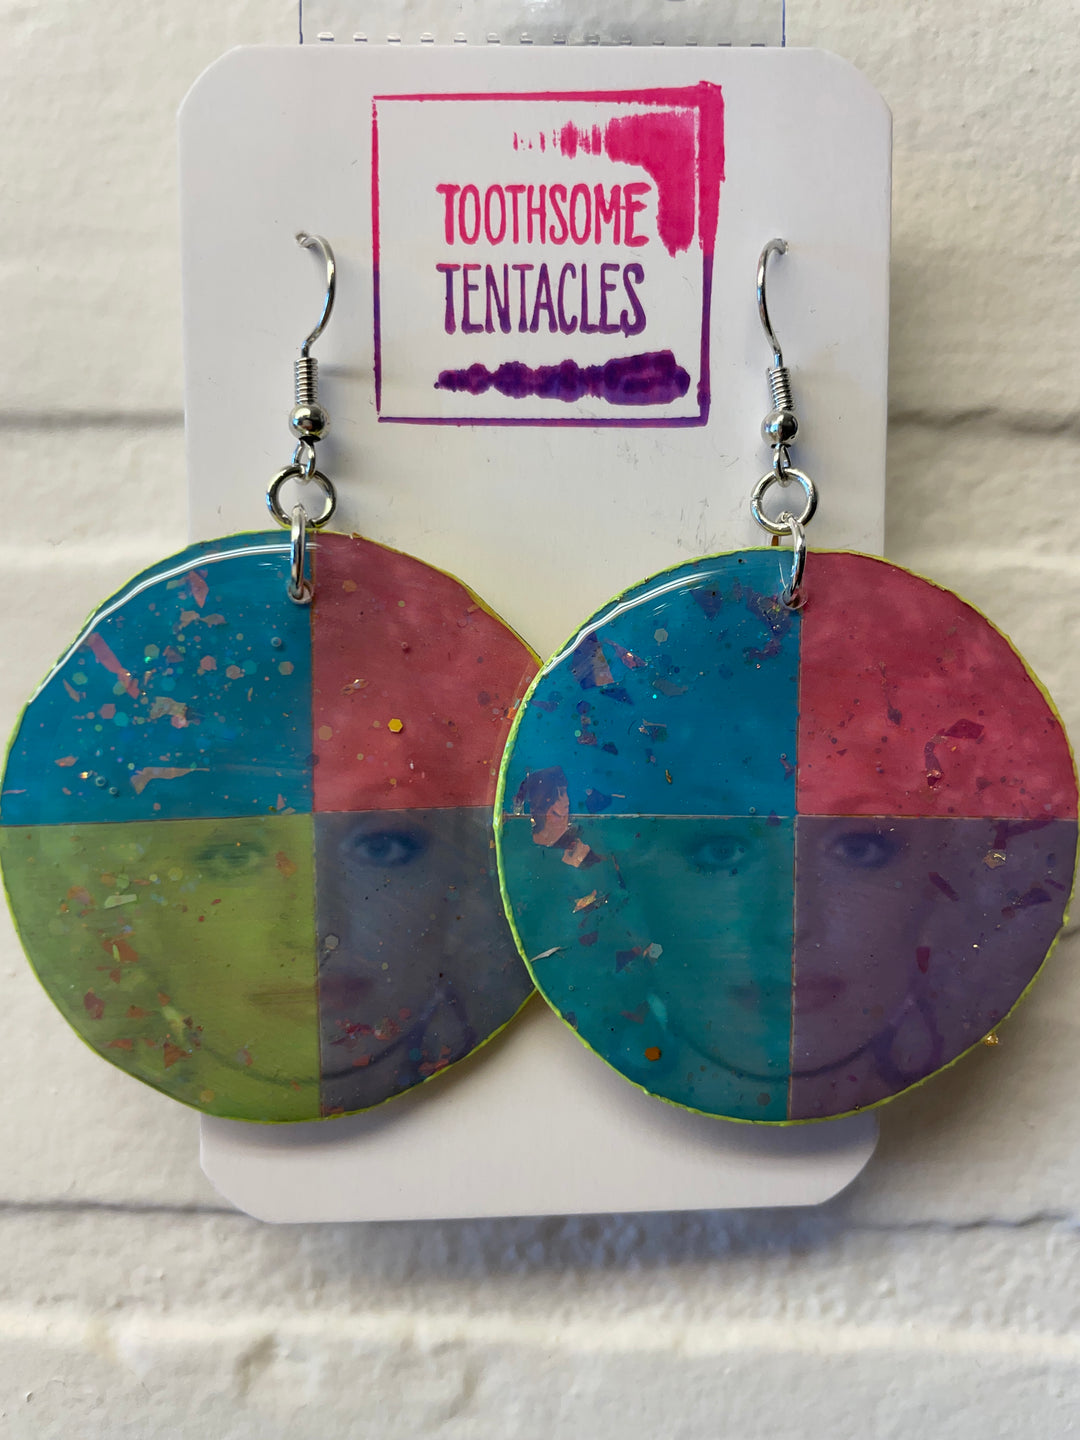 Clipped Magazine Dangles - Country Music